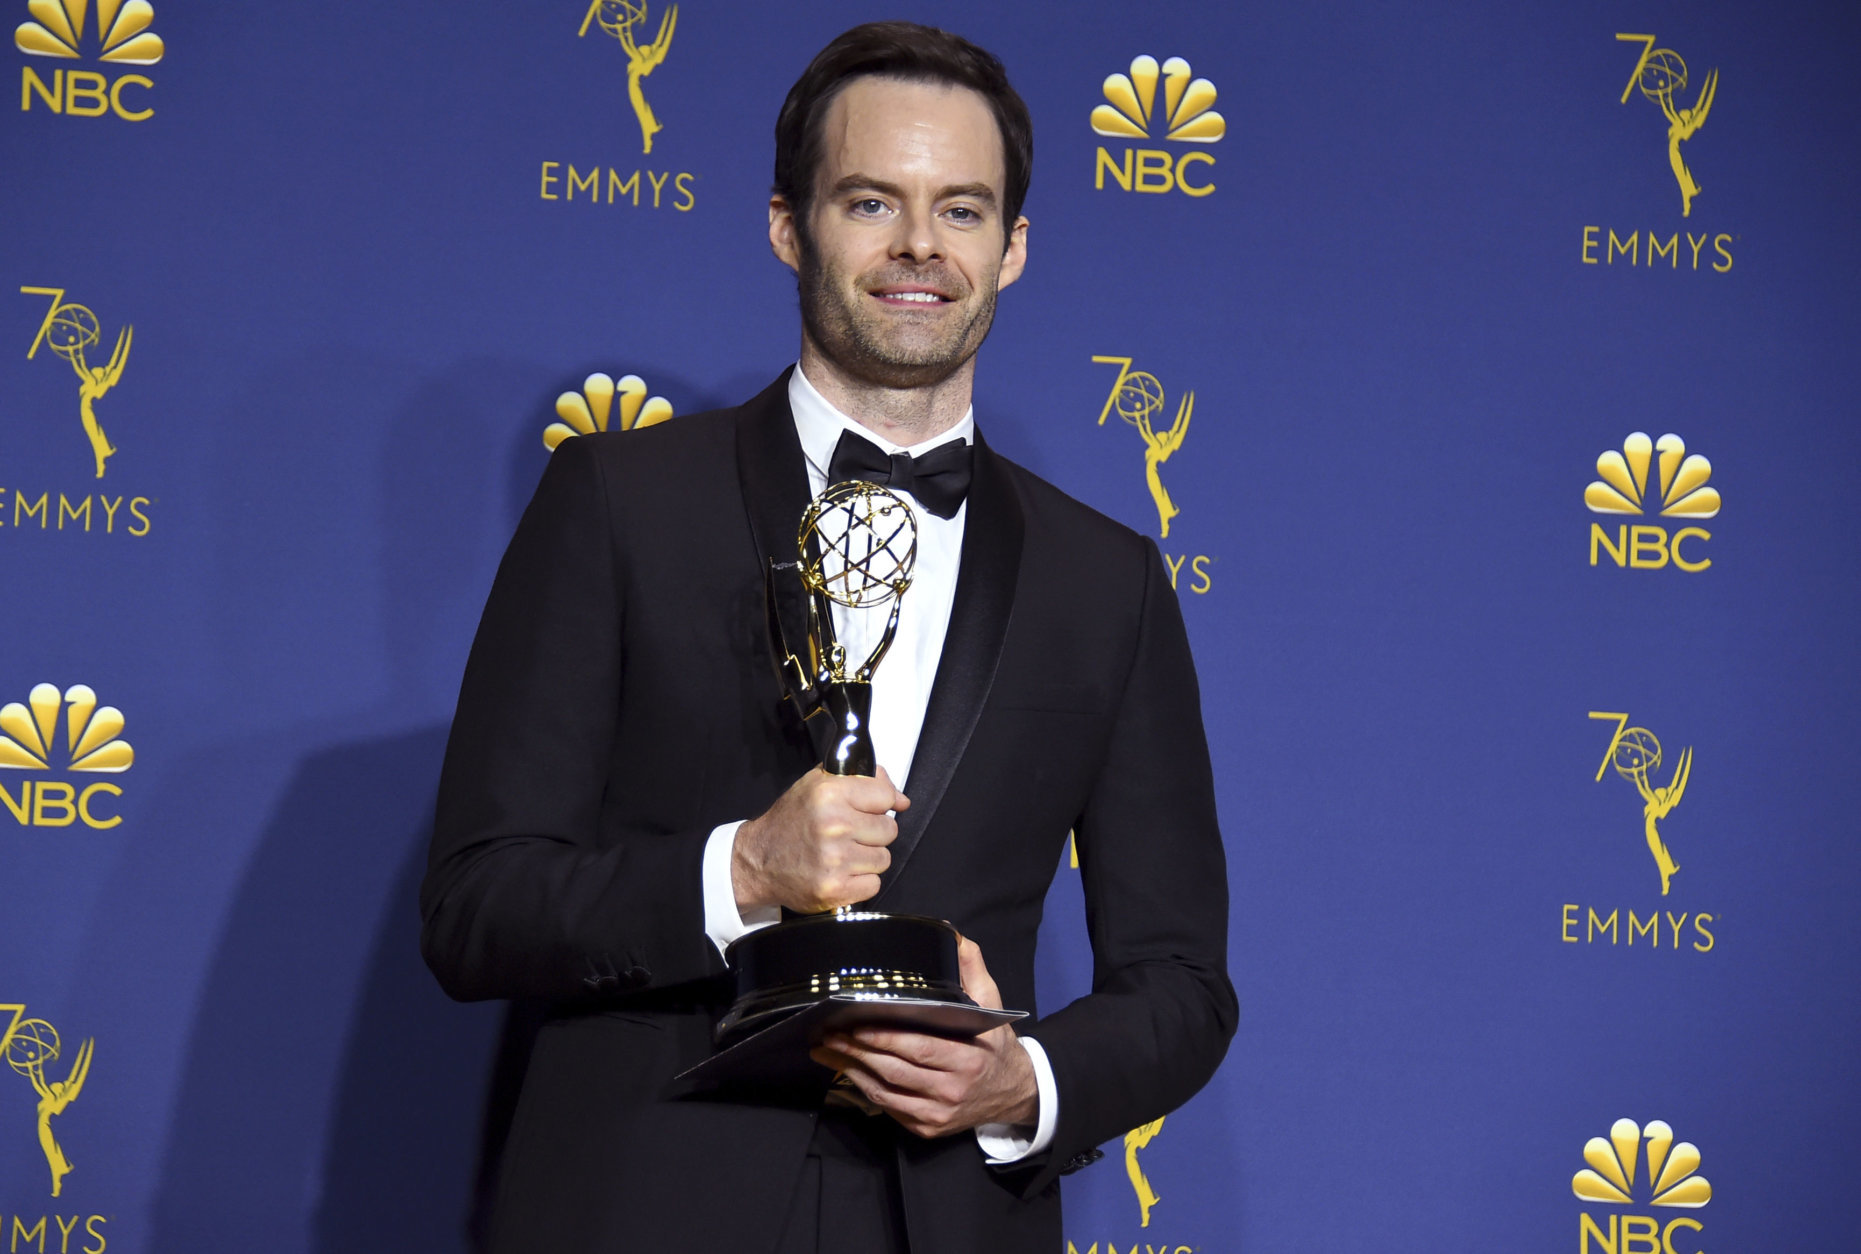 Bill Hader poses in the press room with the award for outstanding lead actor in a comedy series for "Barry" at the 70th Primetime Emmy Awards on Monday, Sept. 17, 2018, at the Microsoft Theater in Los Angeles. (Photo by Jordan Strauss/Invision/AP)